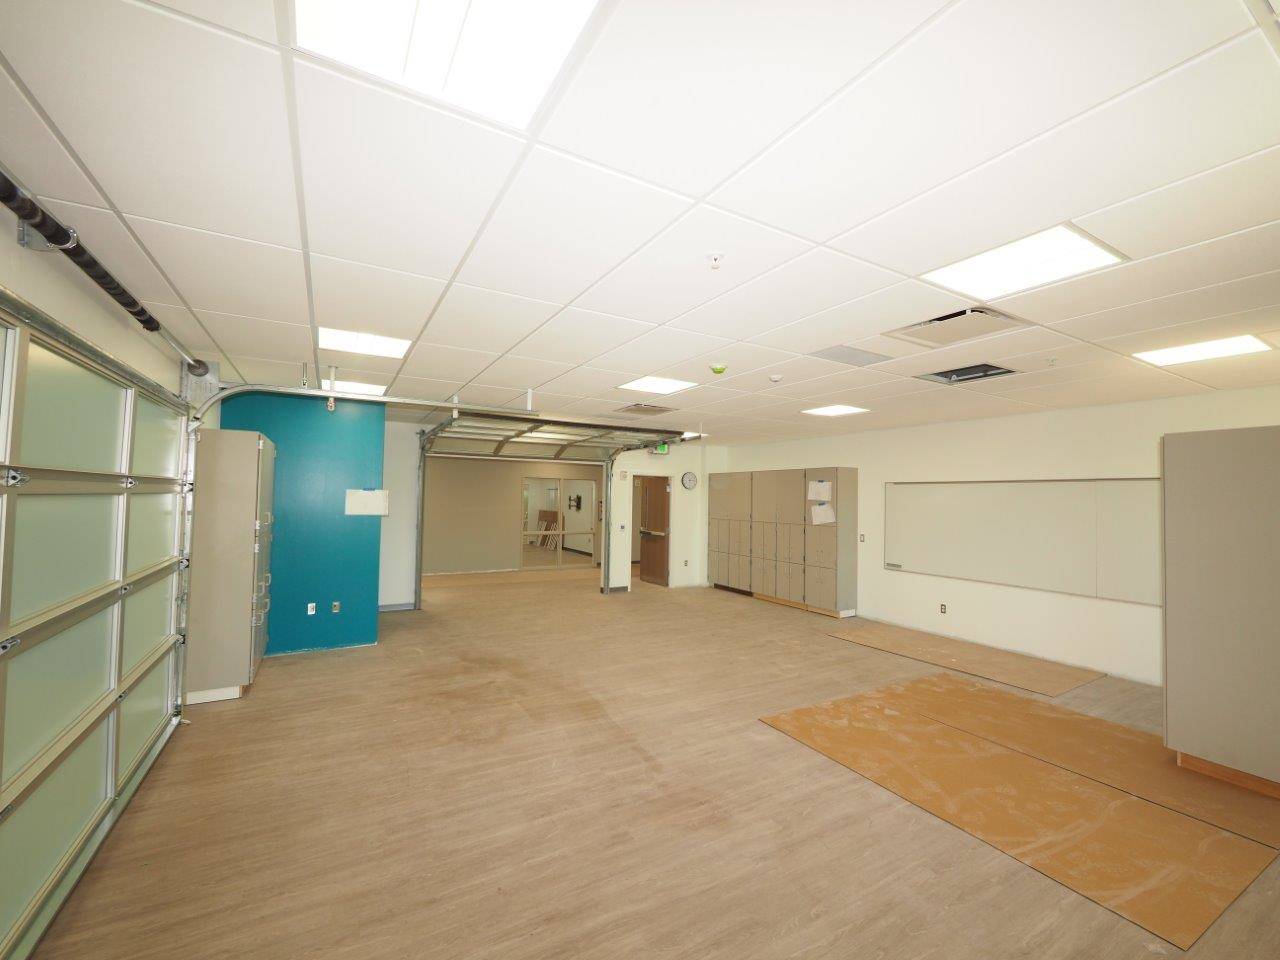 Inside the new Greensview Elementary School